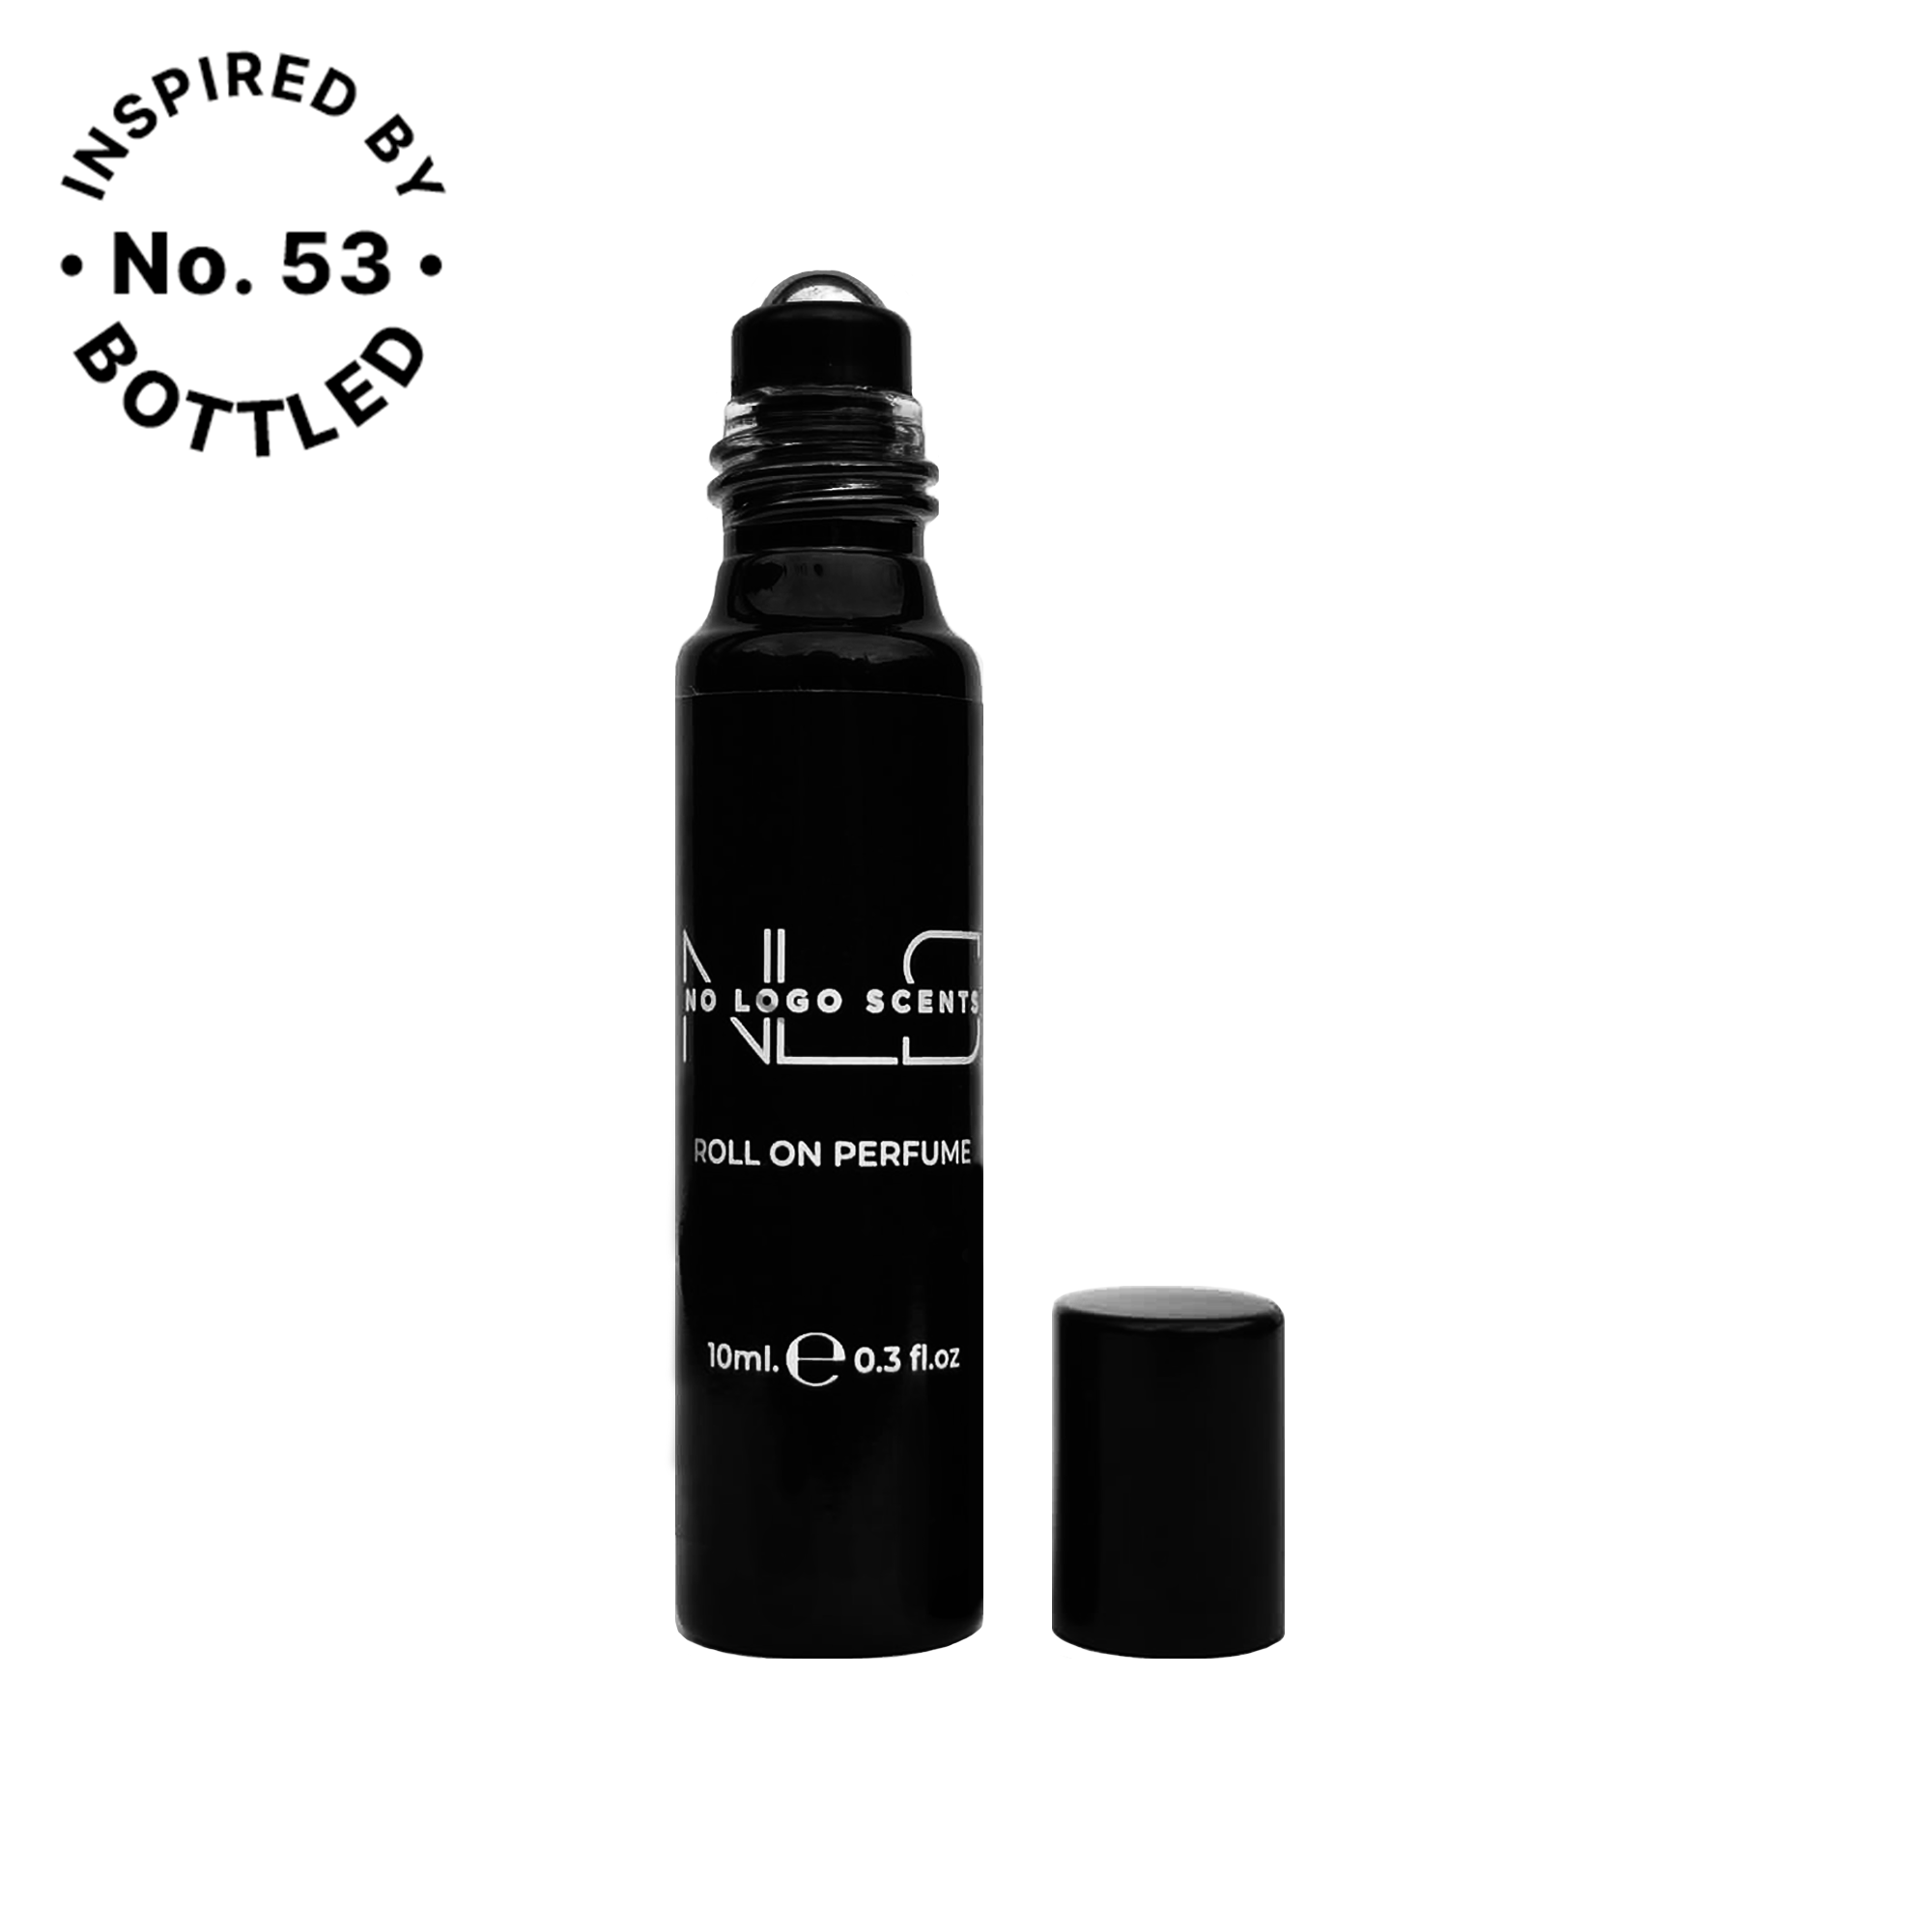 No.53 – INSPIRED BY BOTTLED from category MEN’S ROLL ON PERFUMES - 1